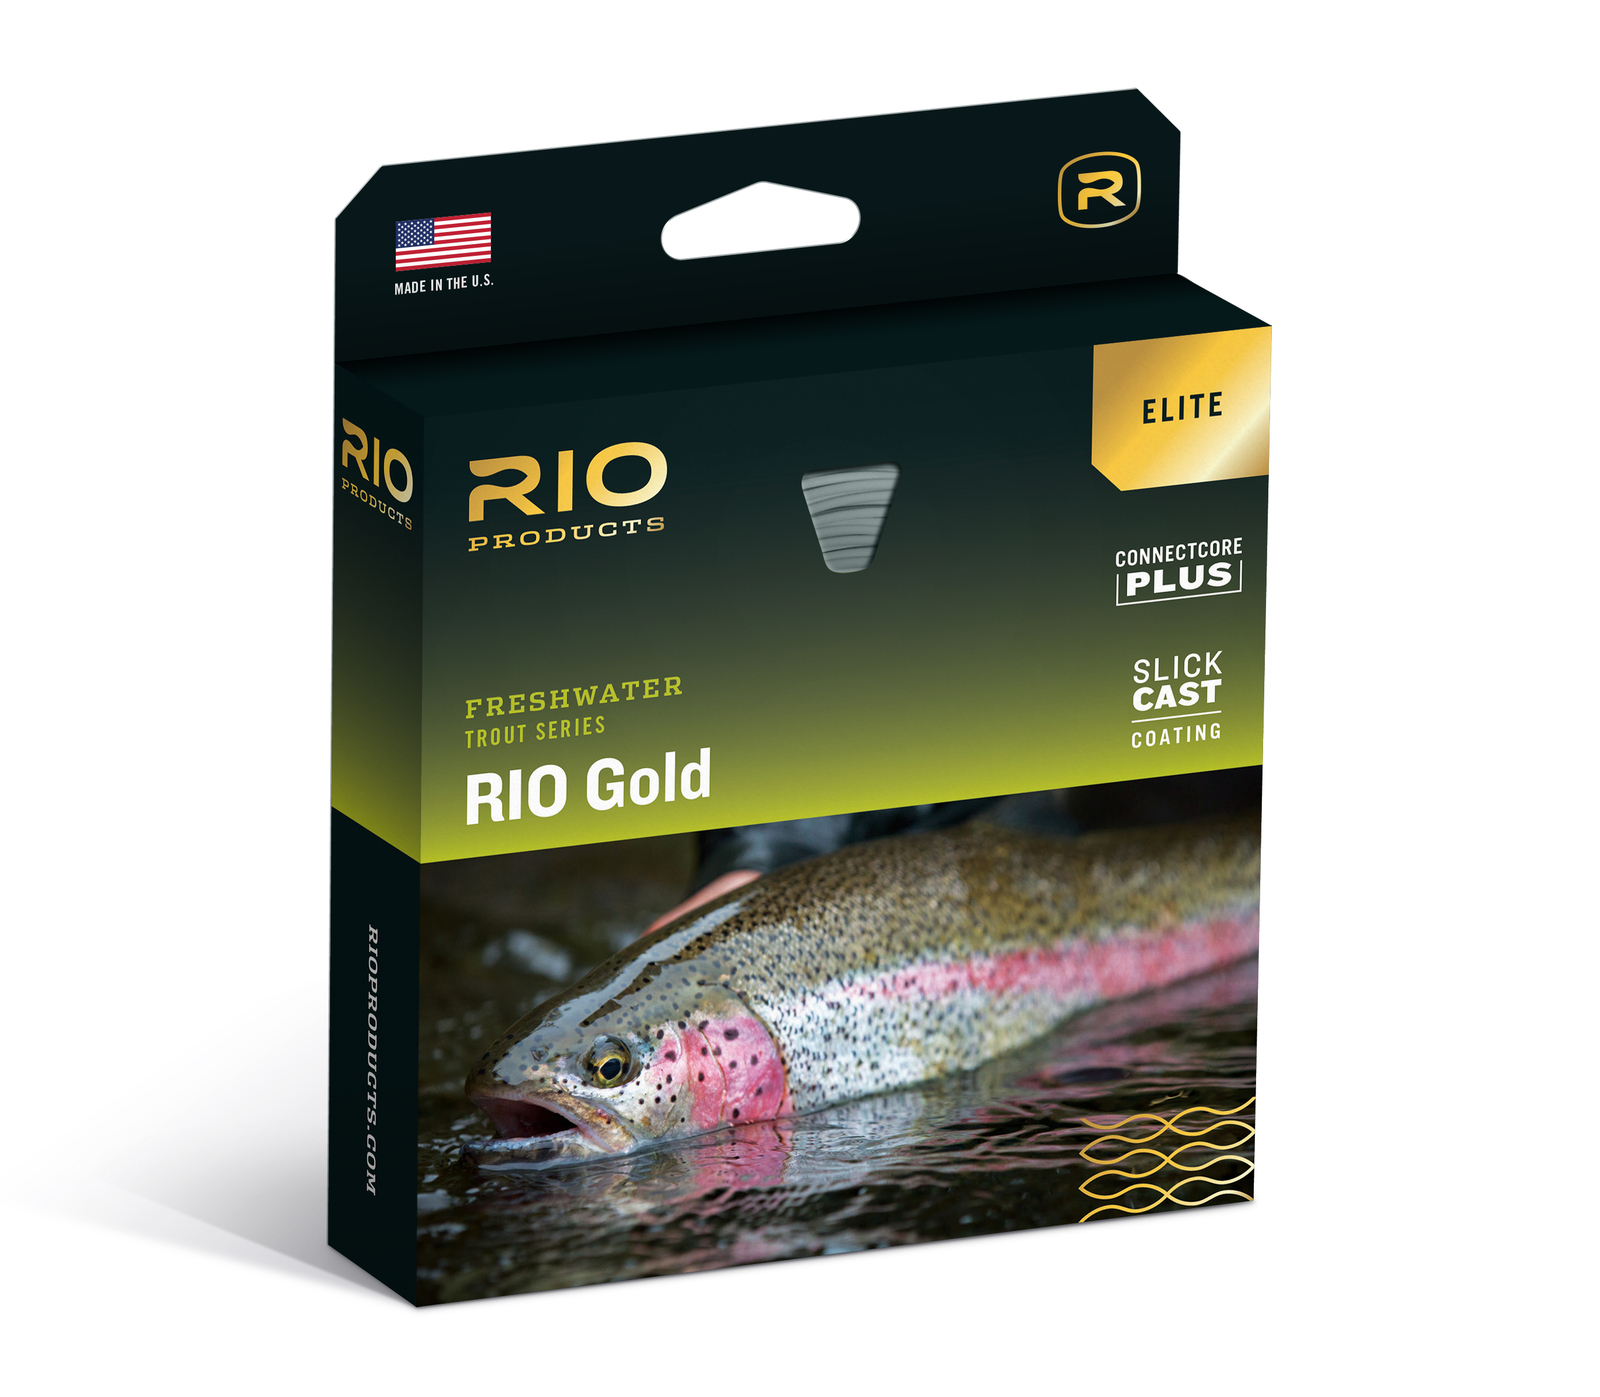 Rio Freshwater Trout Series Elite Rio Gold Fly Line · WF · 8wt · Floating · Moss - Gold - Gray